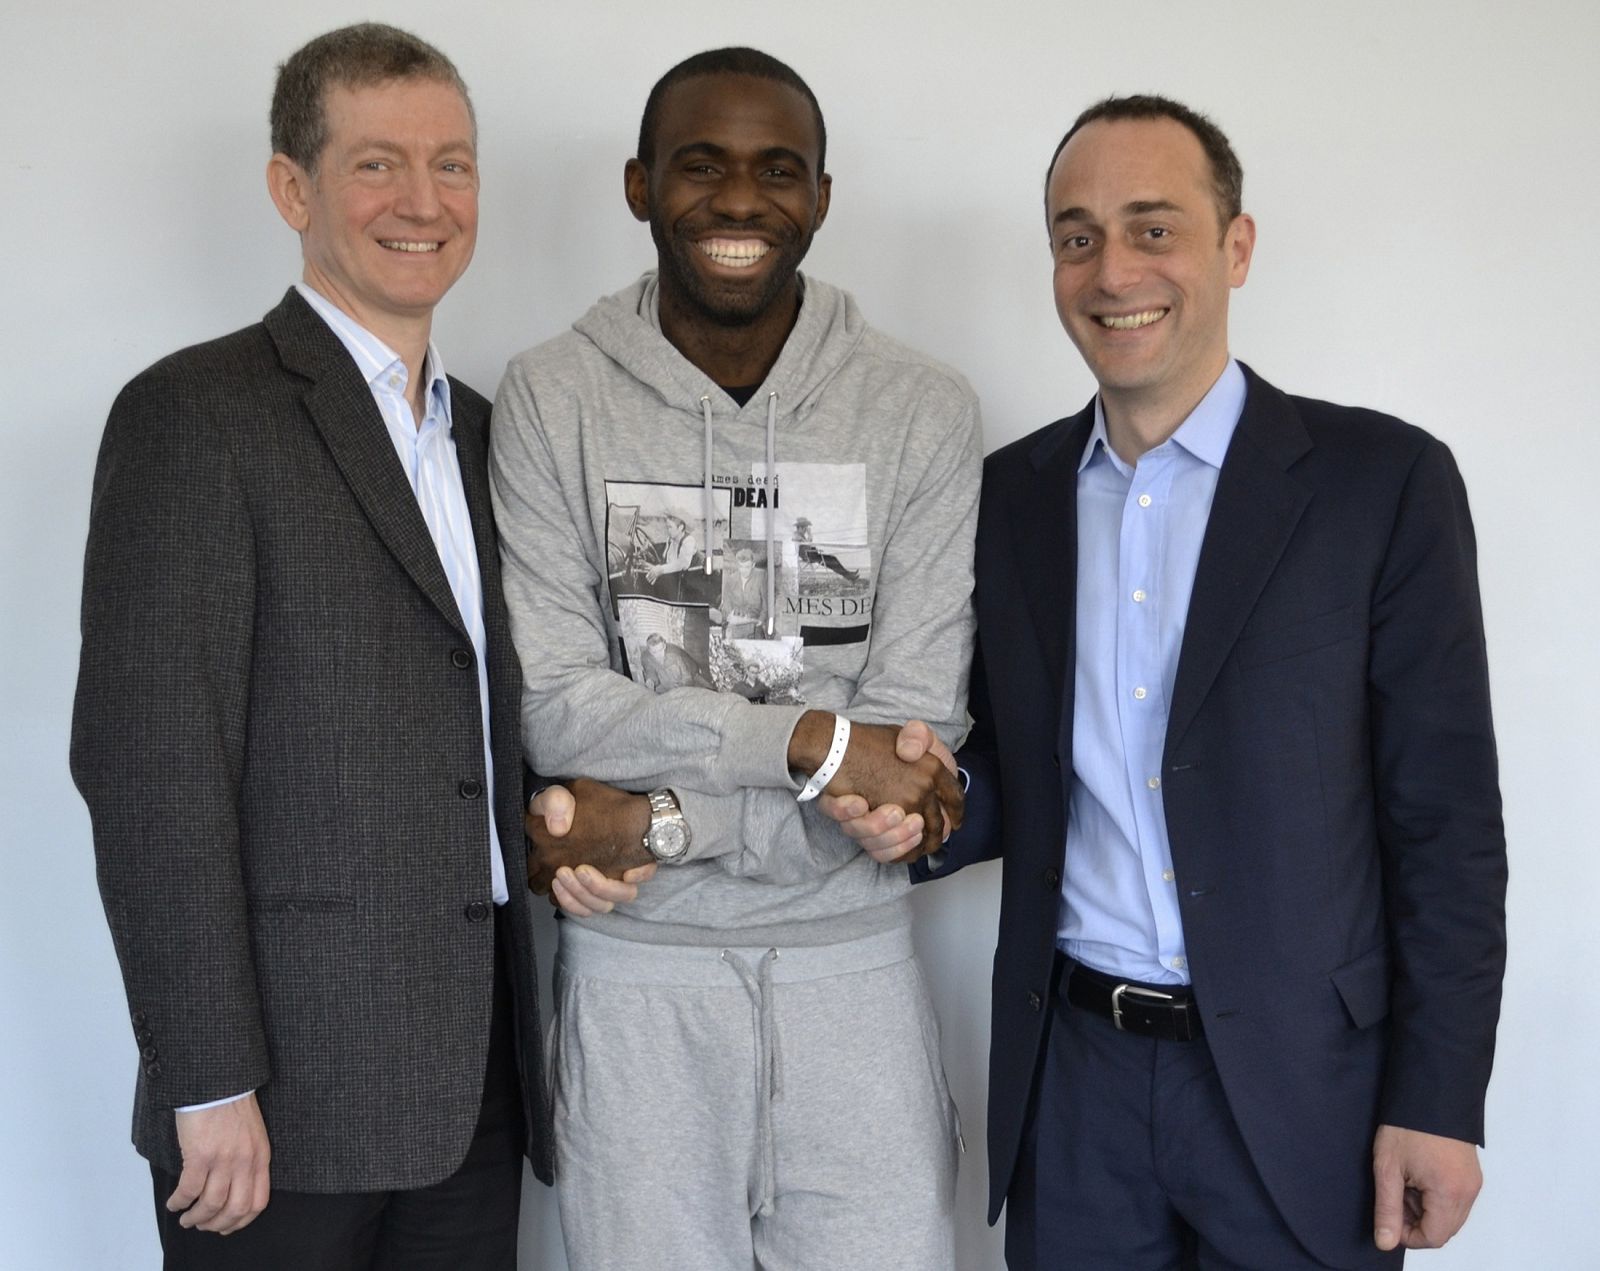 Bolton Wanderers footballer Fabrice Muamba poses for a photograph with Dr Andrew Deaner and Dr Sam Mohiddin in this undated photograph